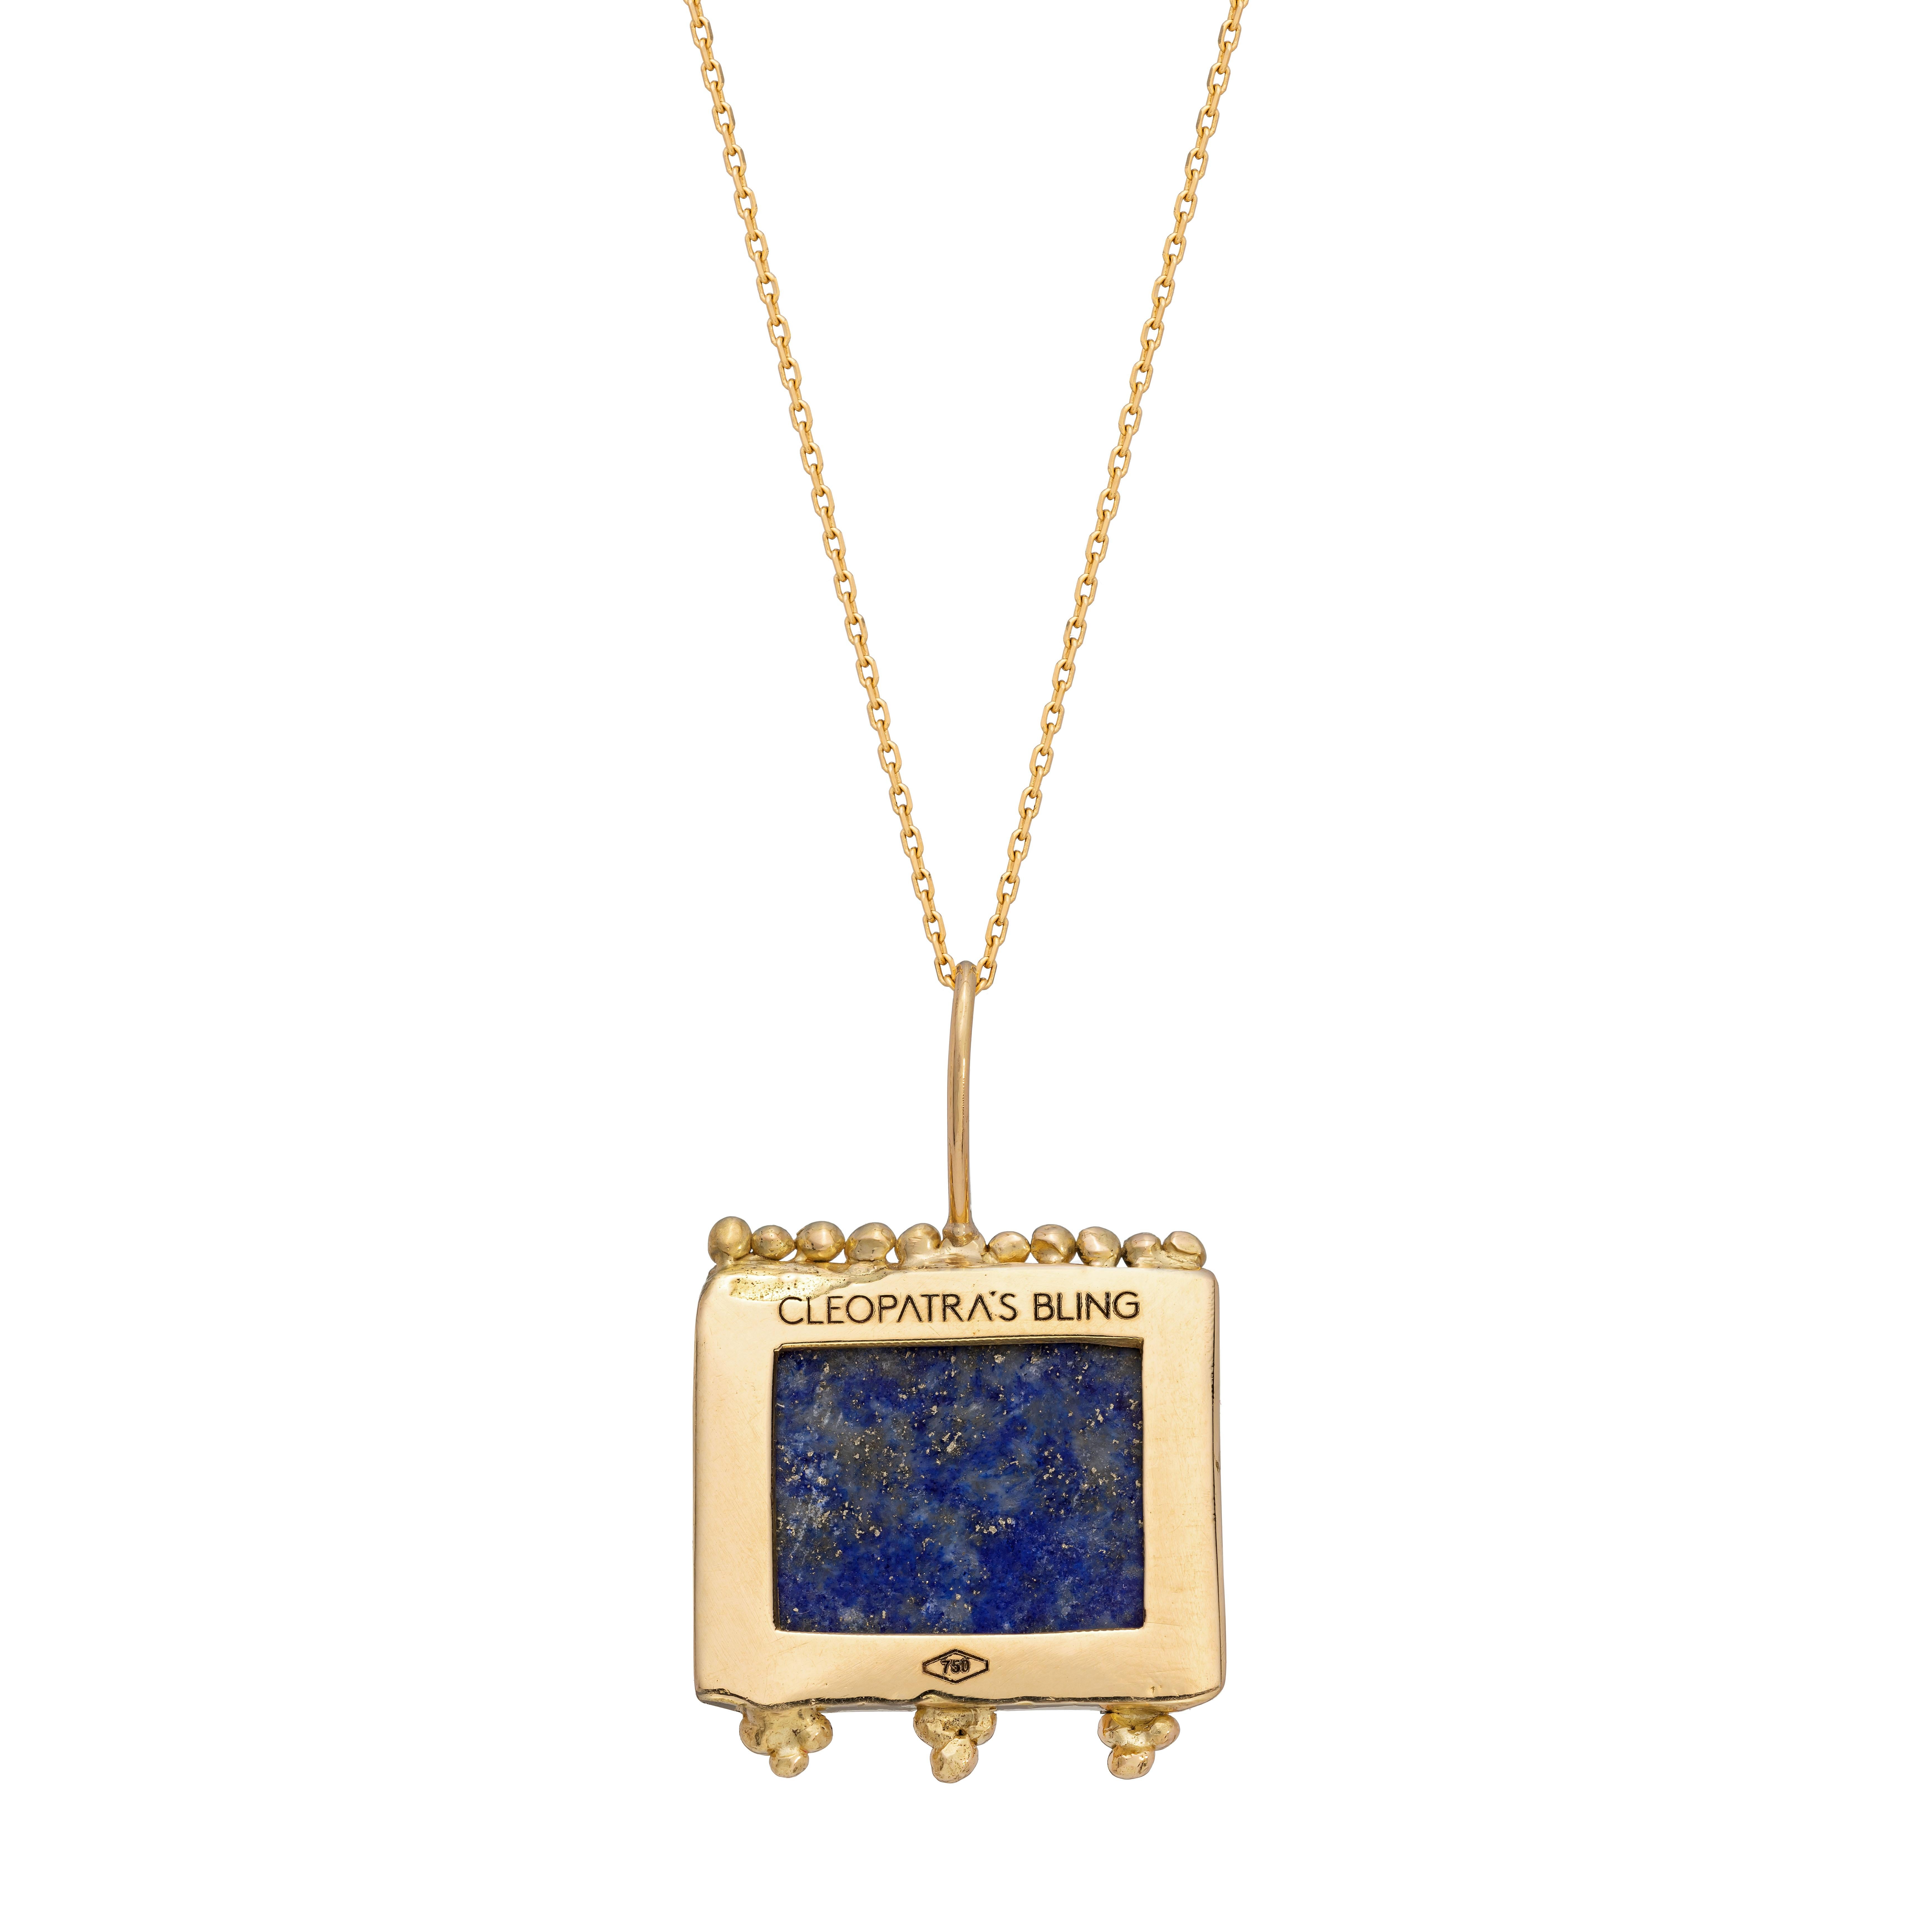 Chrysaor Pendant in Lapis Lazuli, 18 Karat Yellow Gold
The Relic Collection pieces are one off, hand etched pendants. Each stone is individually engraved by hand by artisans which means that every piece is truly one of a kind. These unique relics